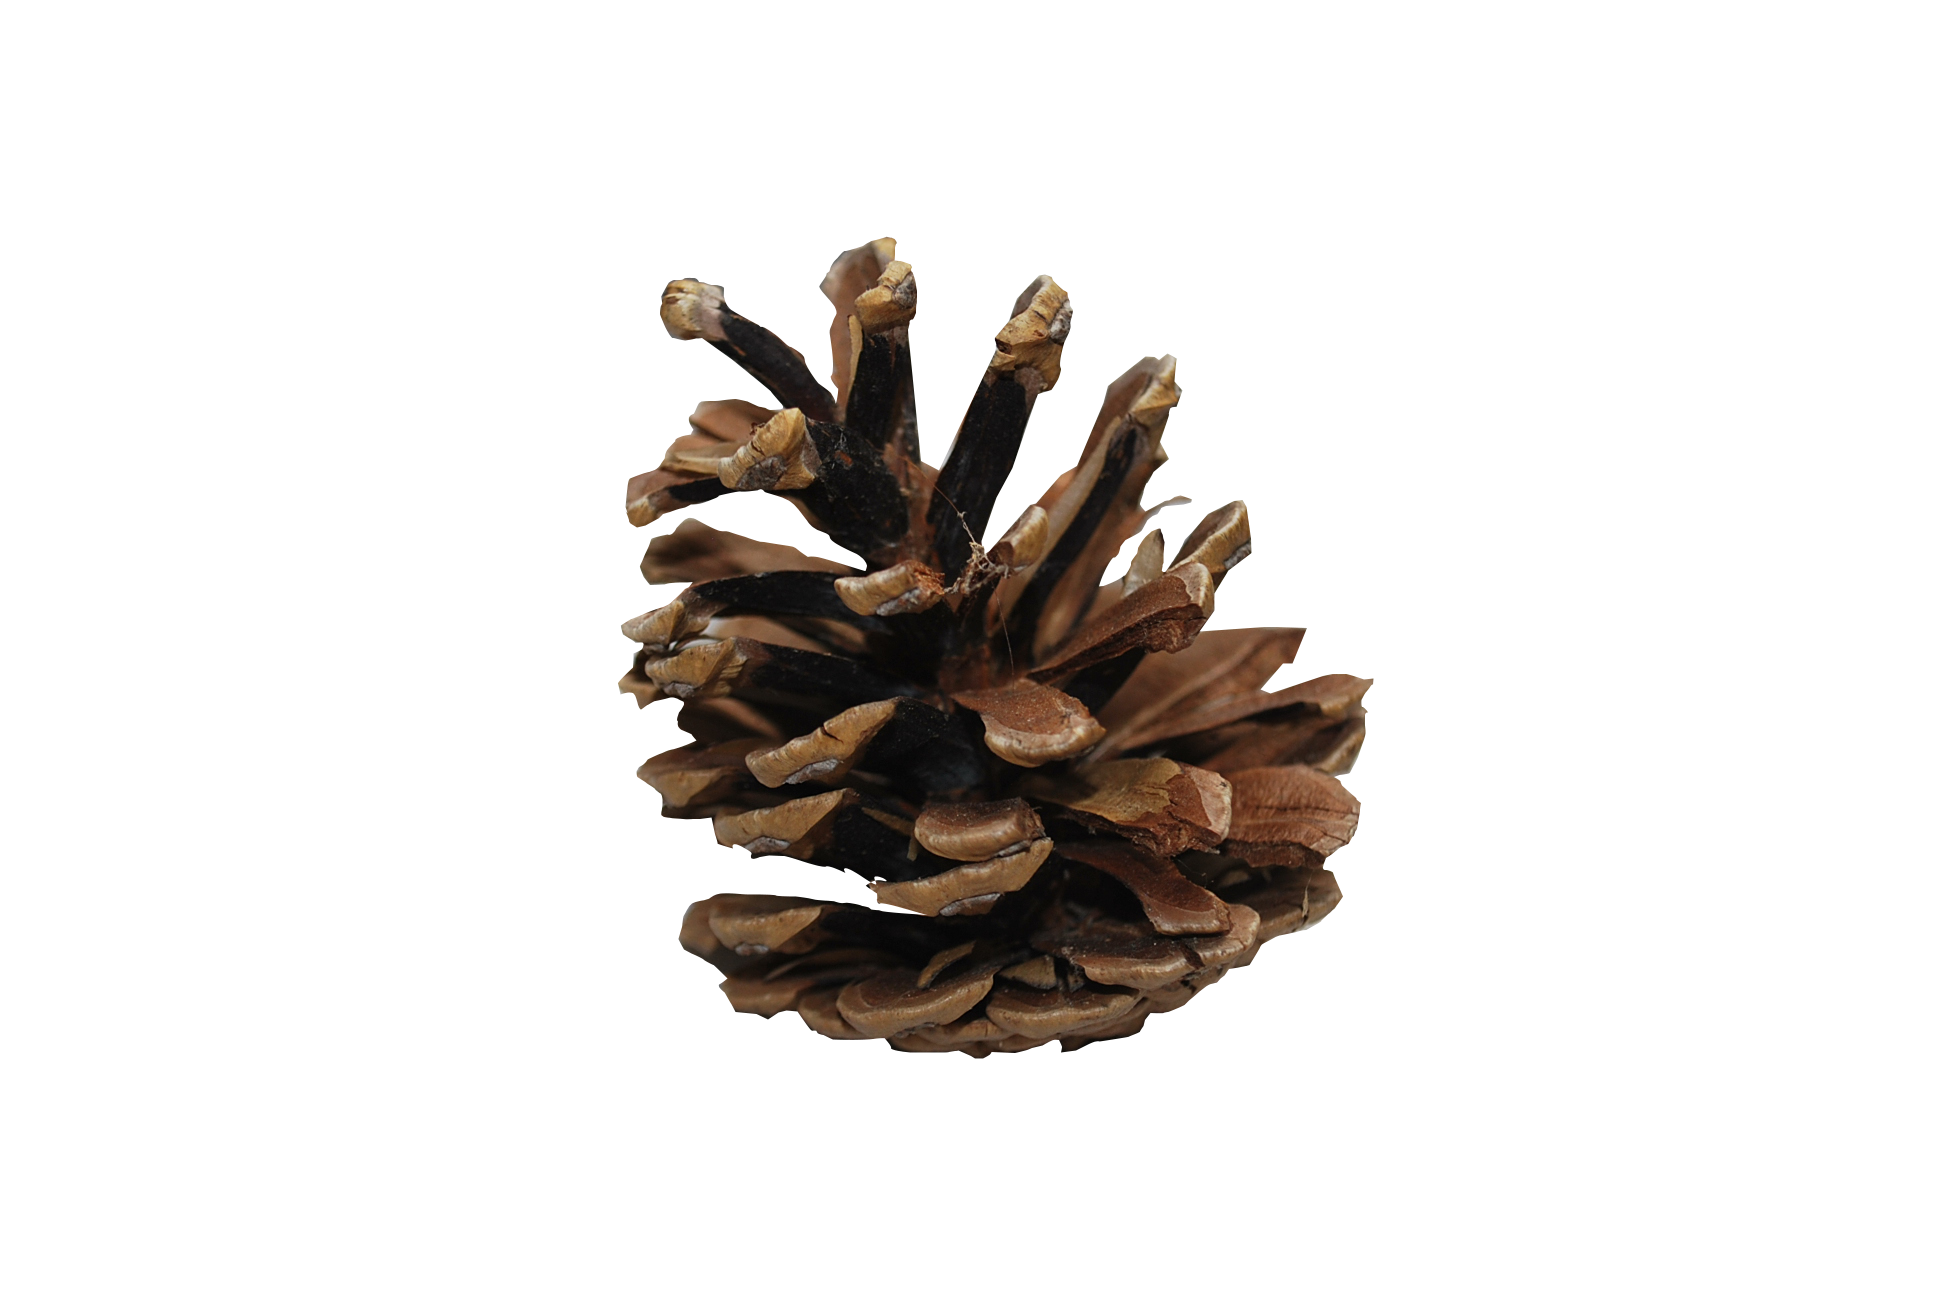 Pine cone PNG